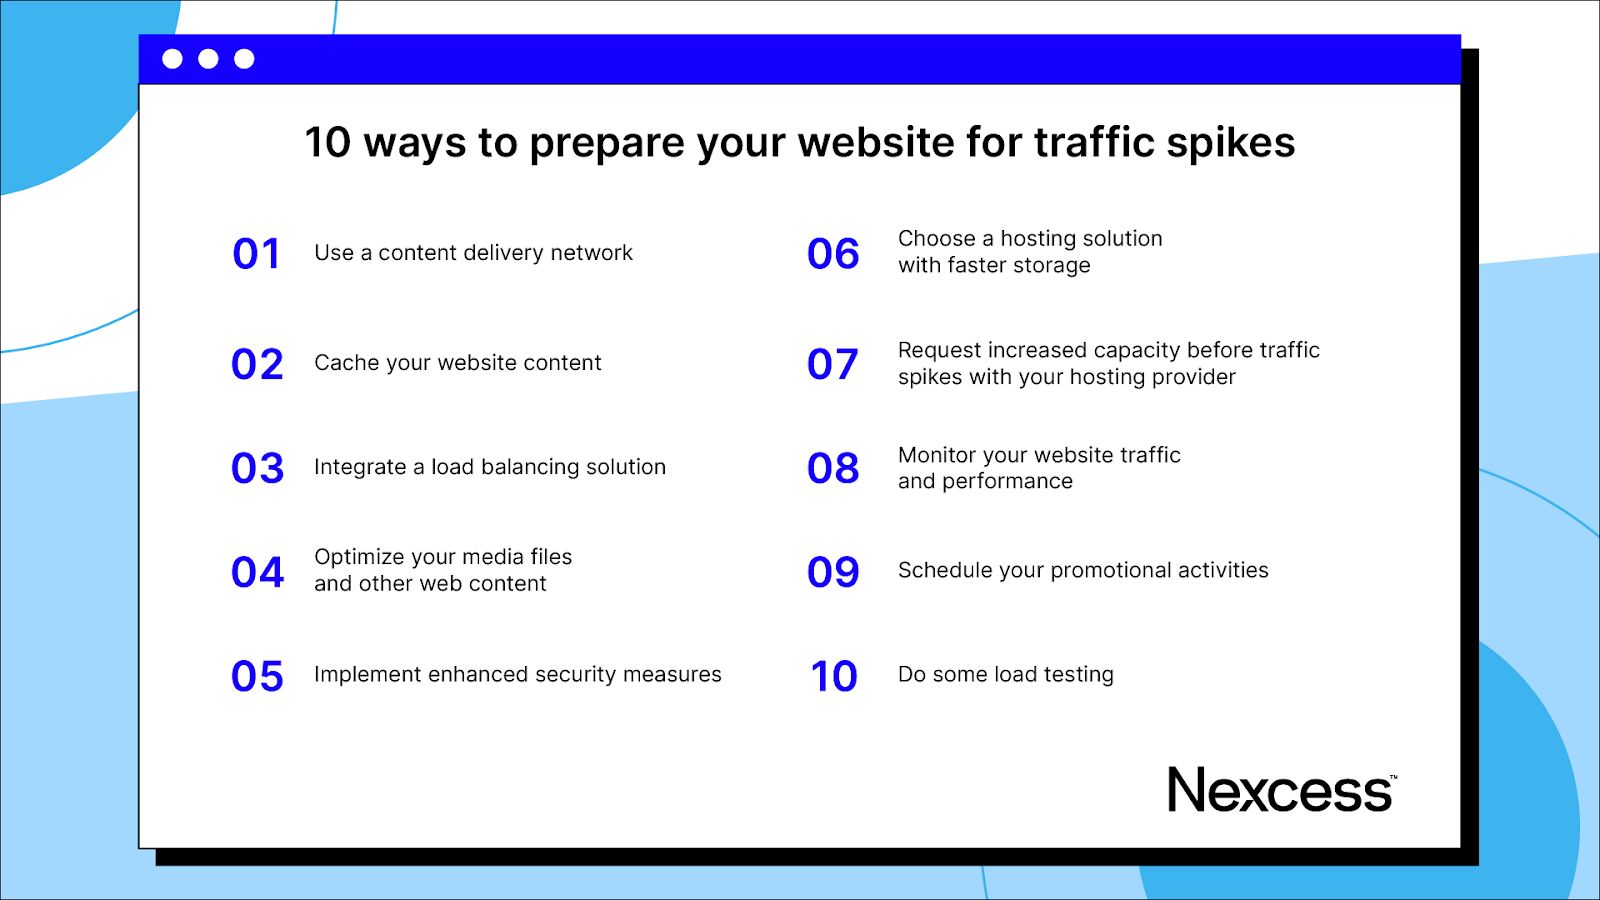 10 ways to prepare your website for traffic surges.